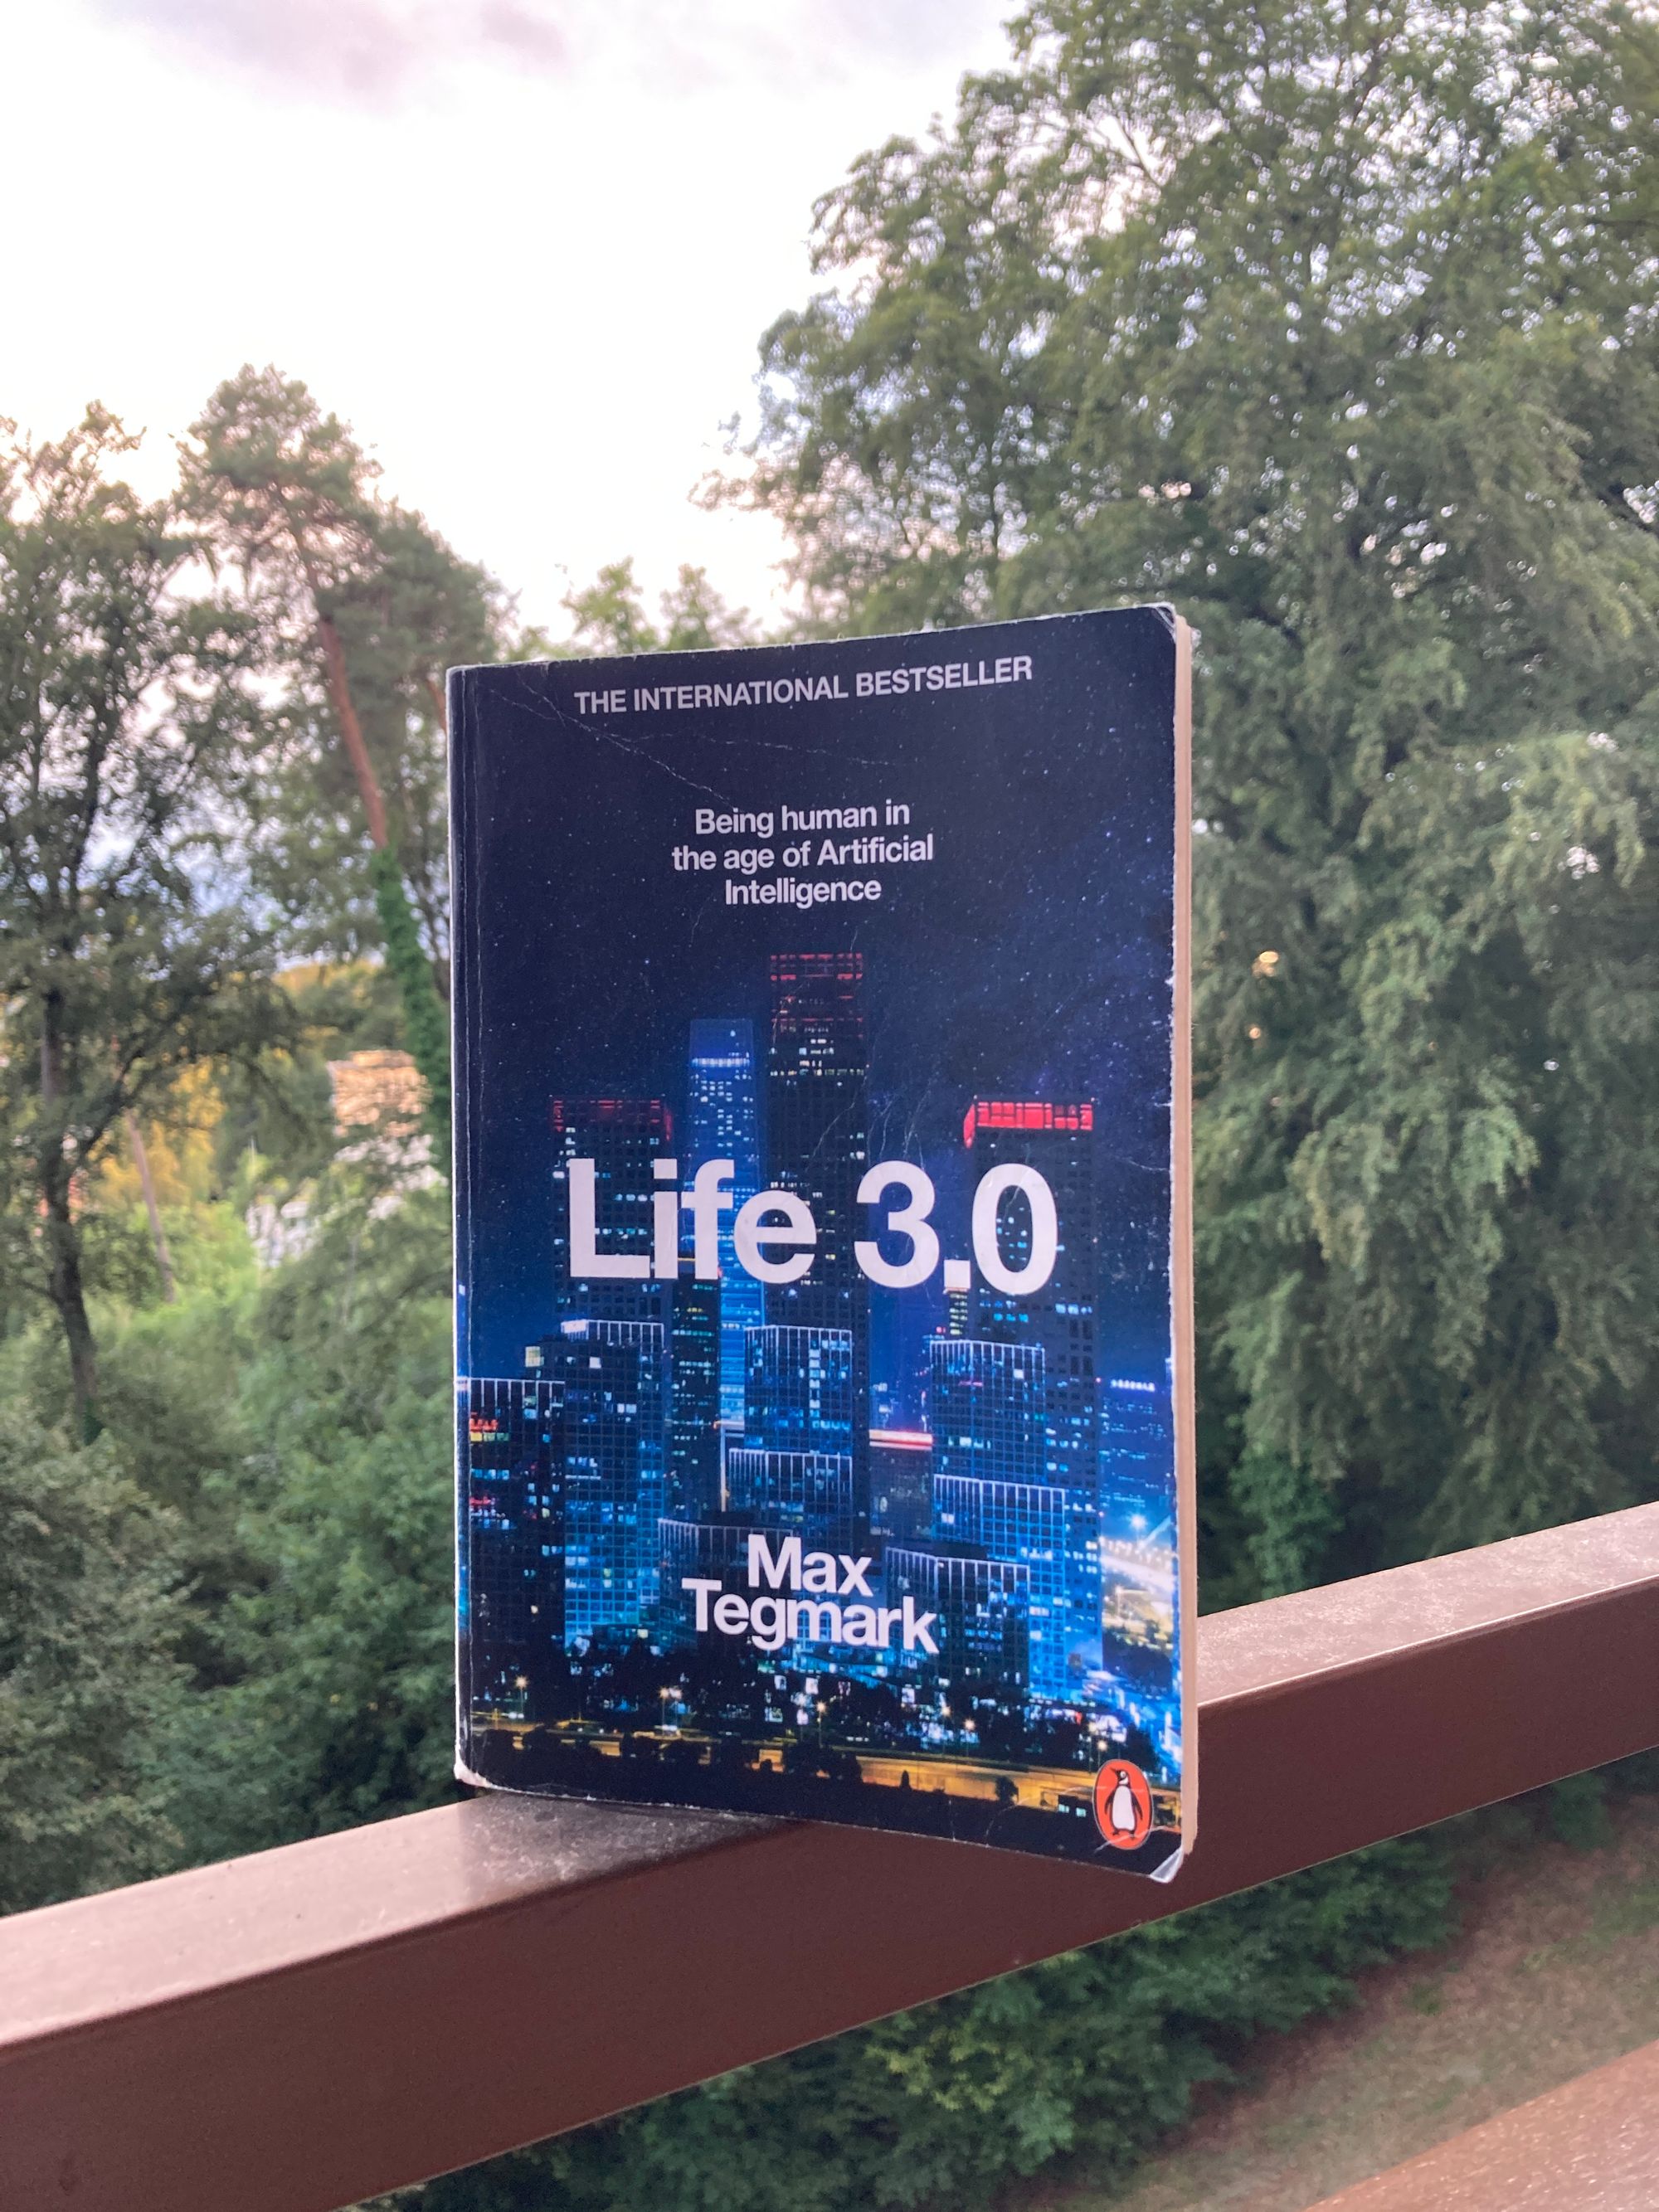 The cover of the book "Life 3.0" against a background of trees.